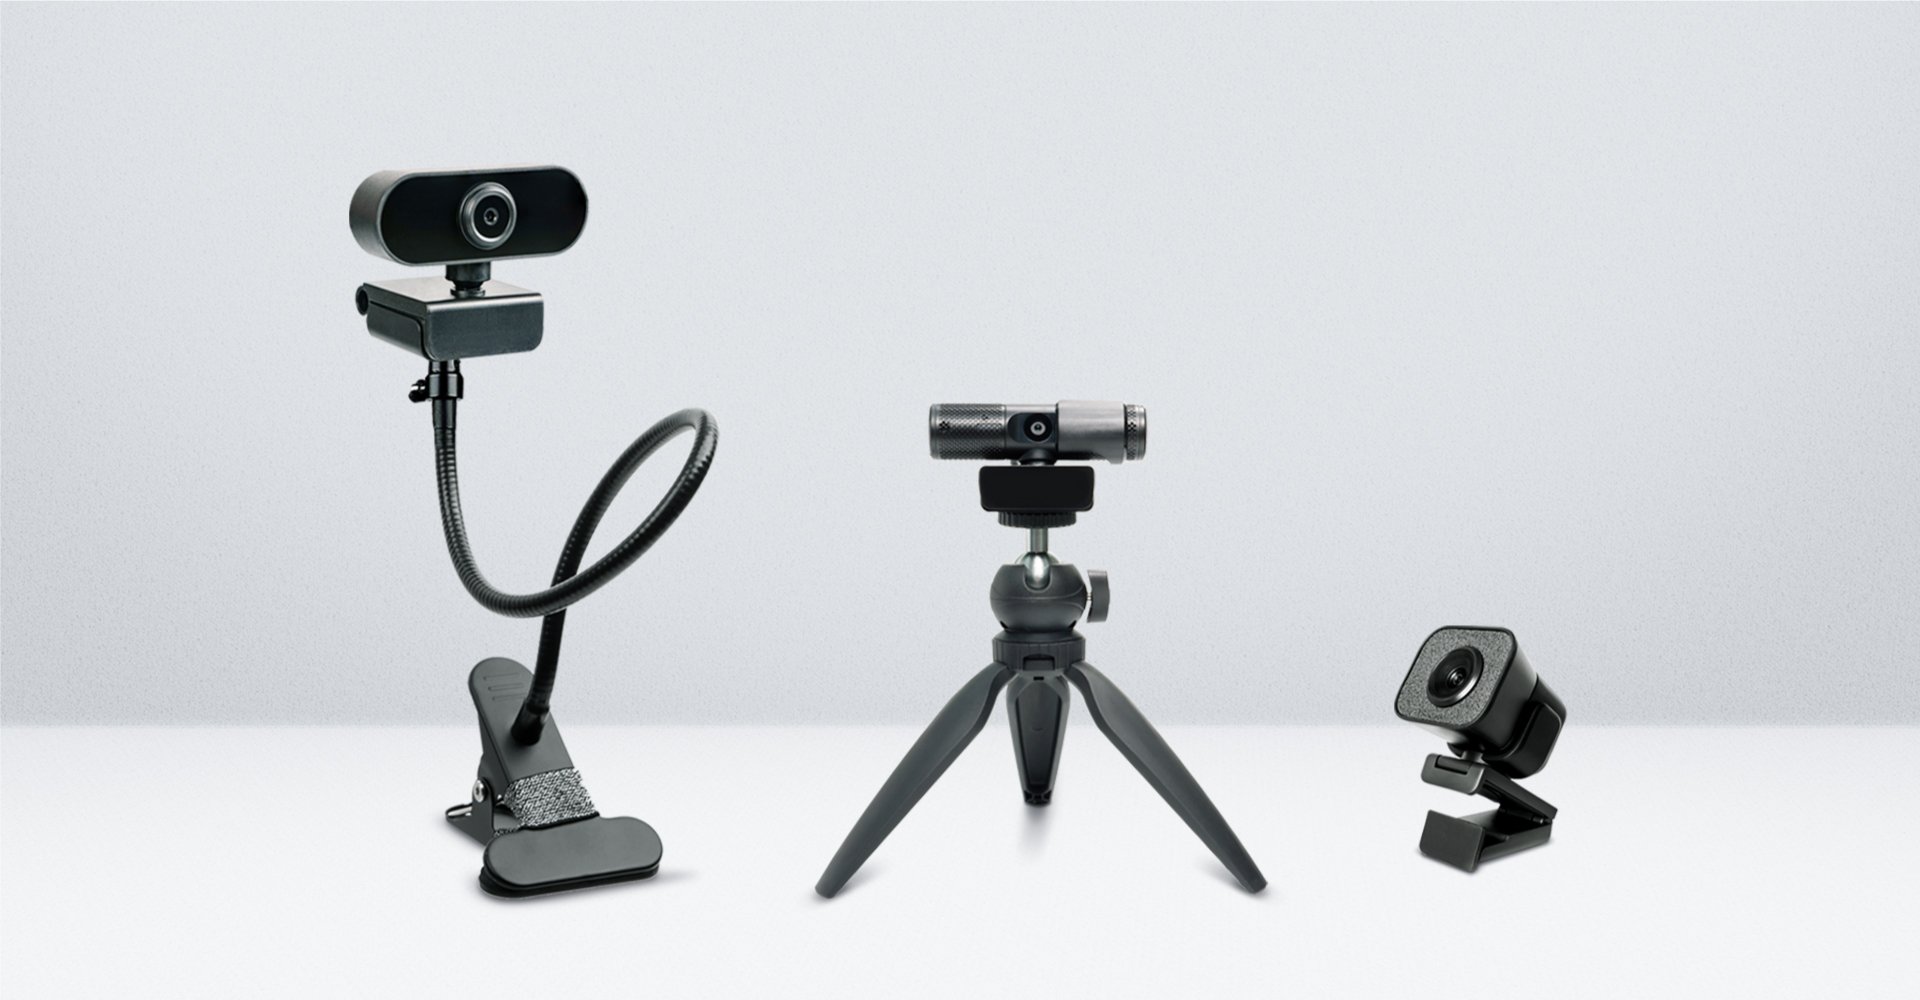 To use your existing webcam as a document camera, you will need a few accessories. Get a webcam mount and a flexible tripod or gooseneck with a desk clamp. When shopping for these accessories, make sure that they are compatible with your webcam model.